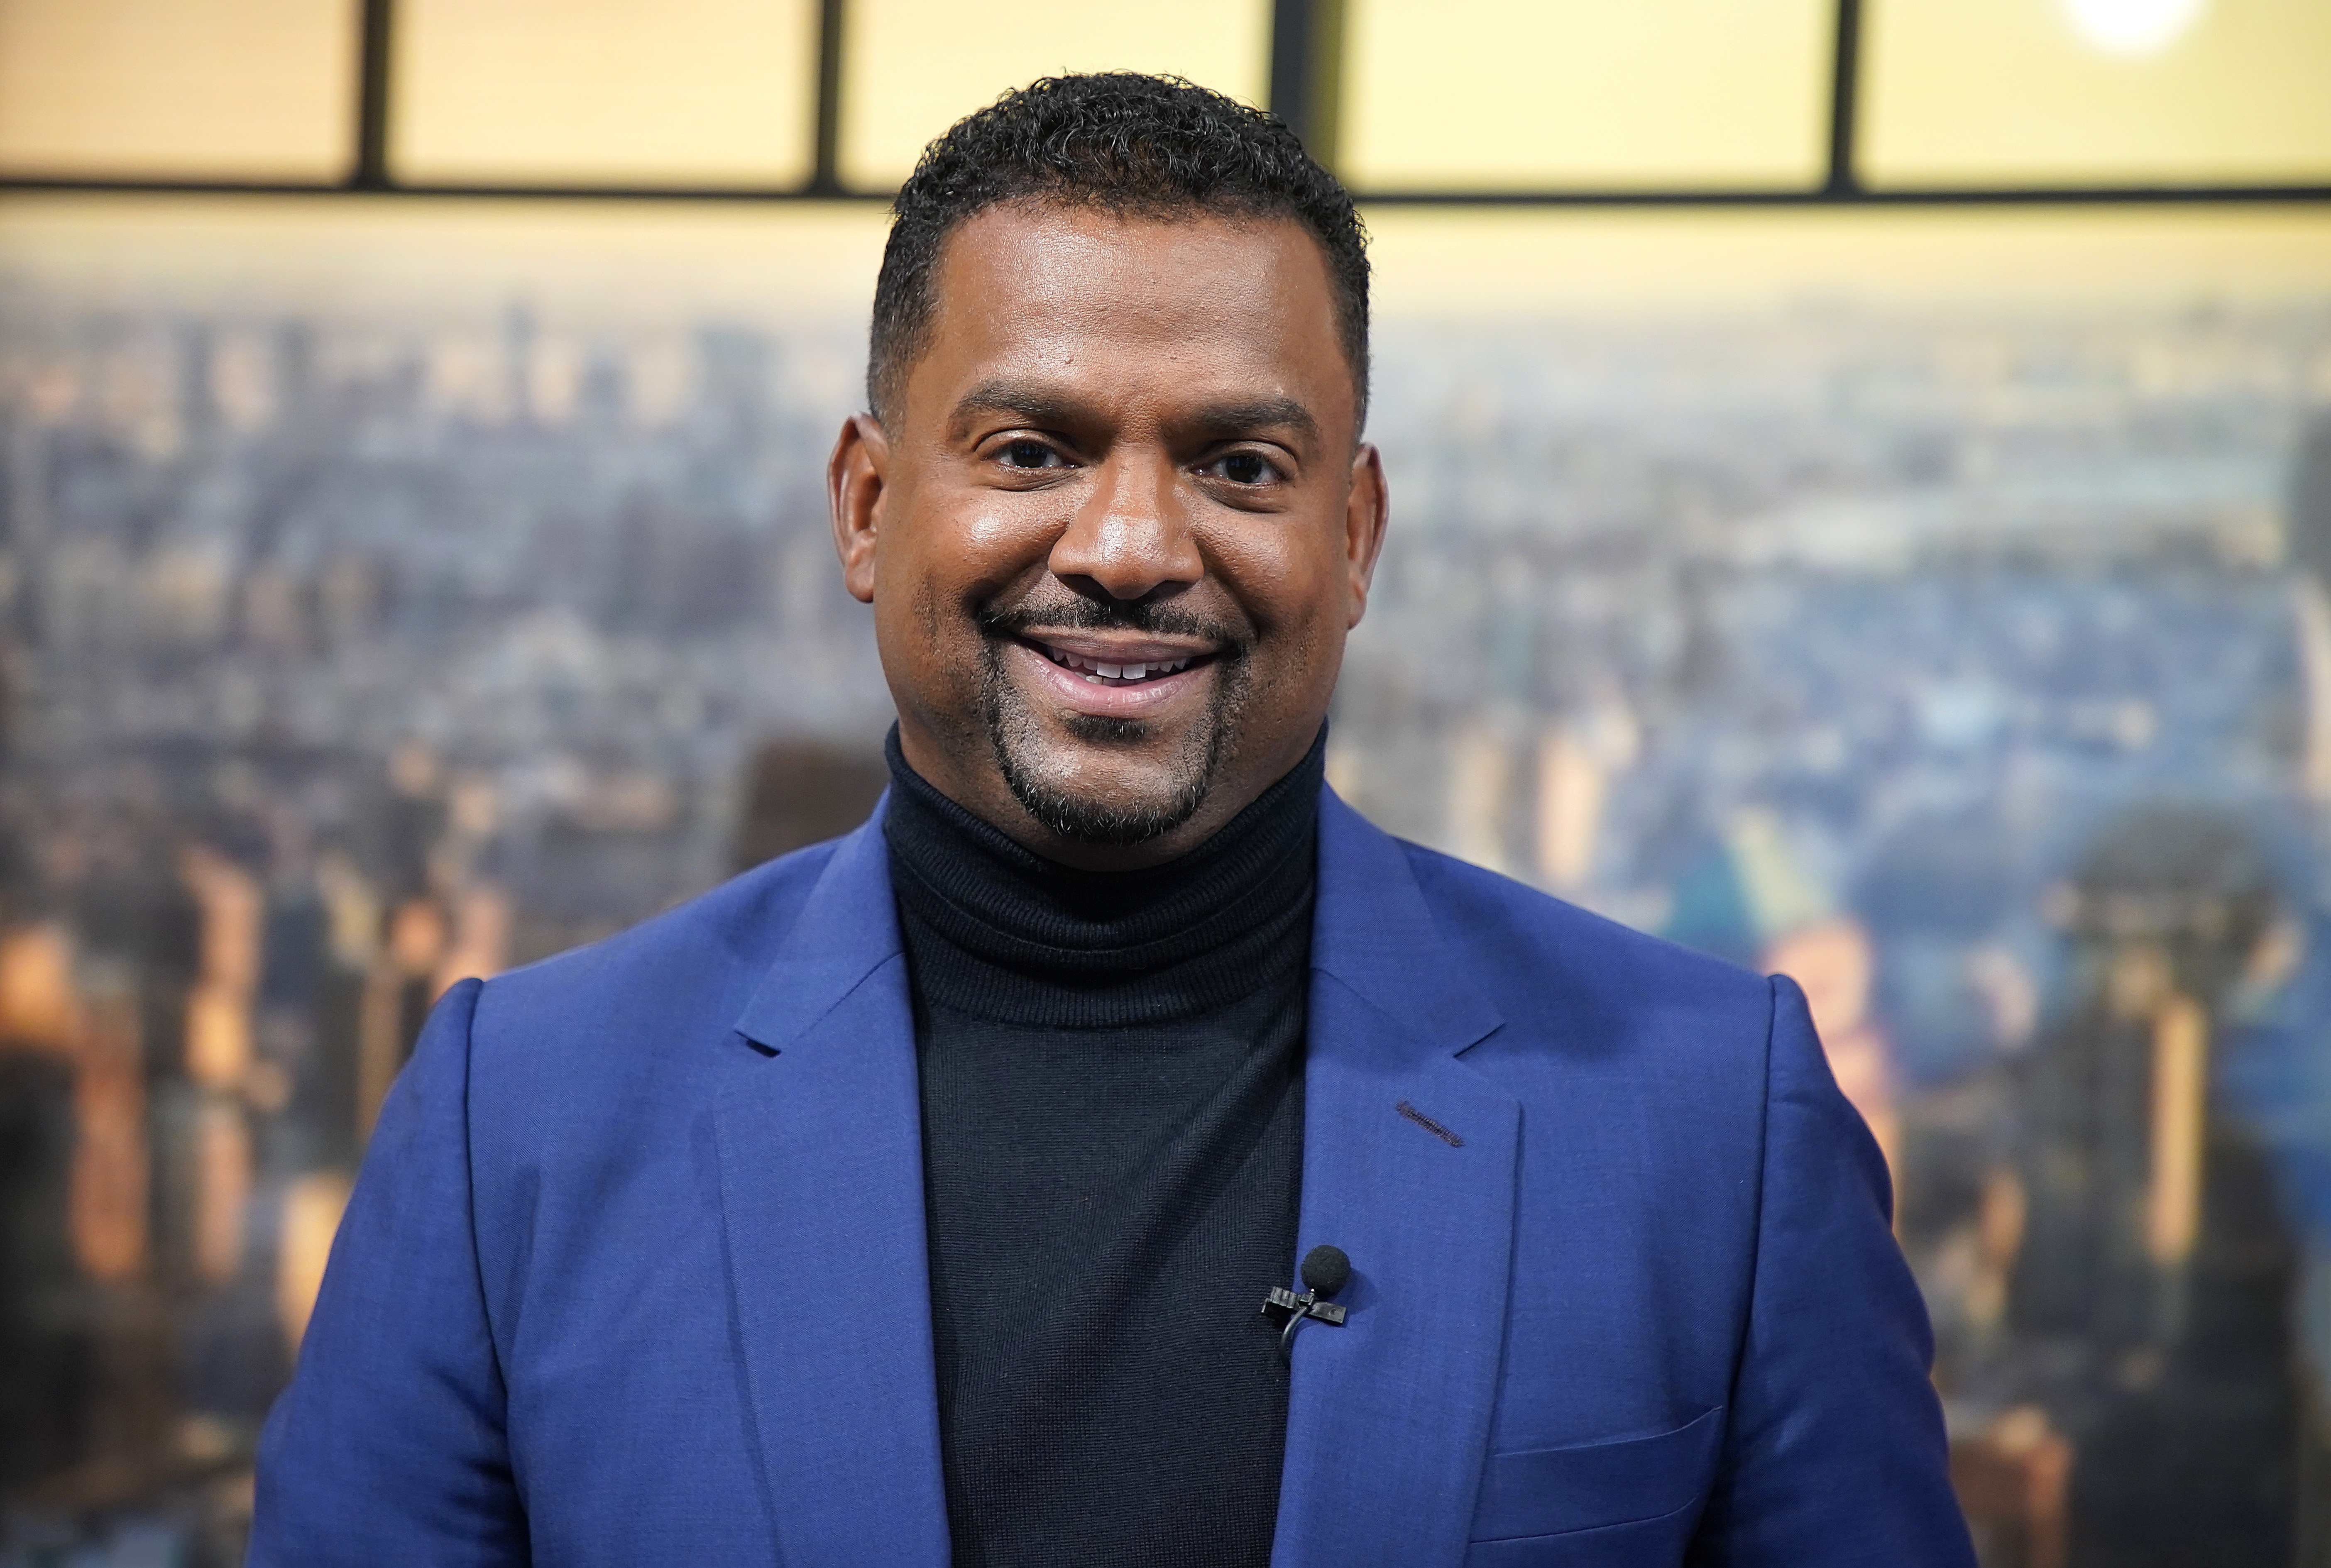 Alfonso Ribeiro at the People Now Studios on November 14, 2019 in New York City, United States.|Source: Getty Images